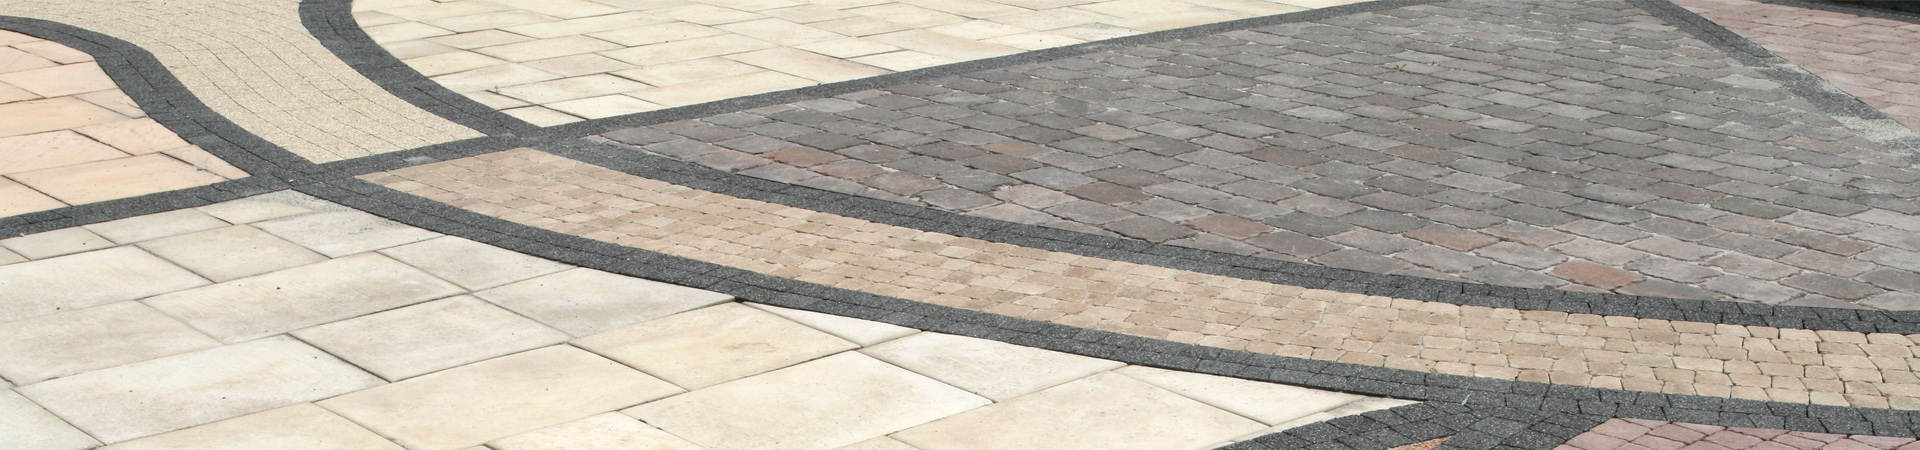 Block paving in Epping. Essex